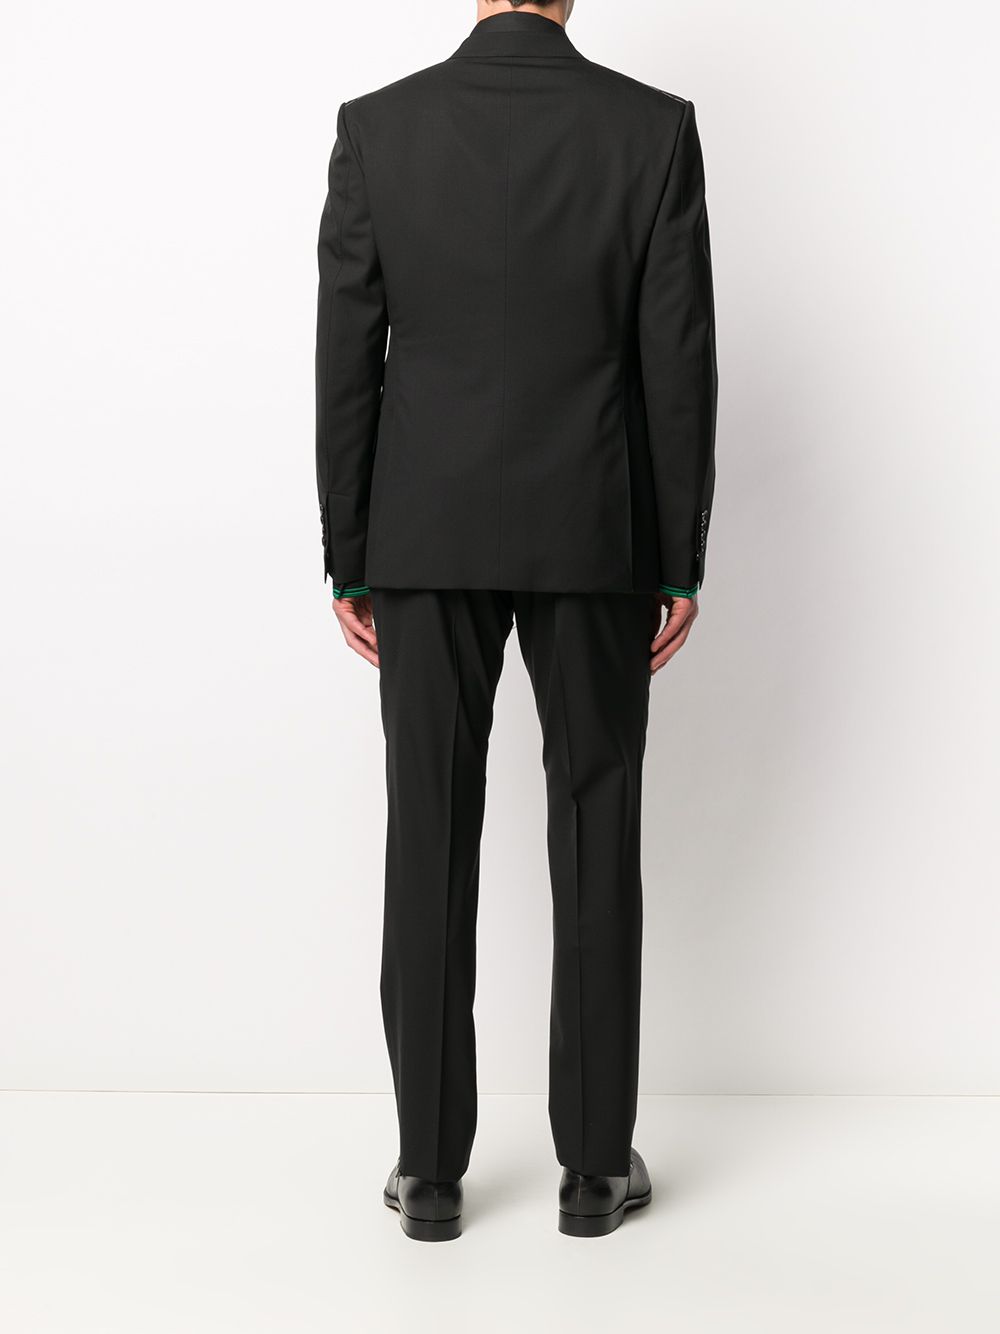 Shop black Tom Ford single-breasted formal suit with Express Delivery ...